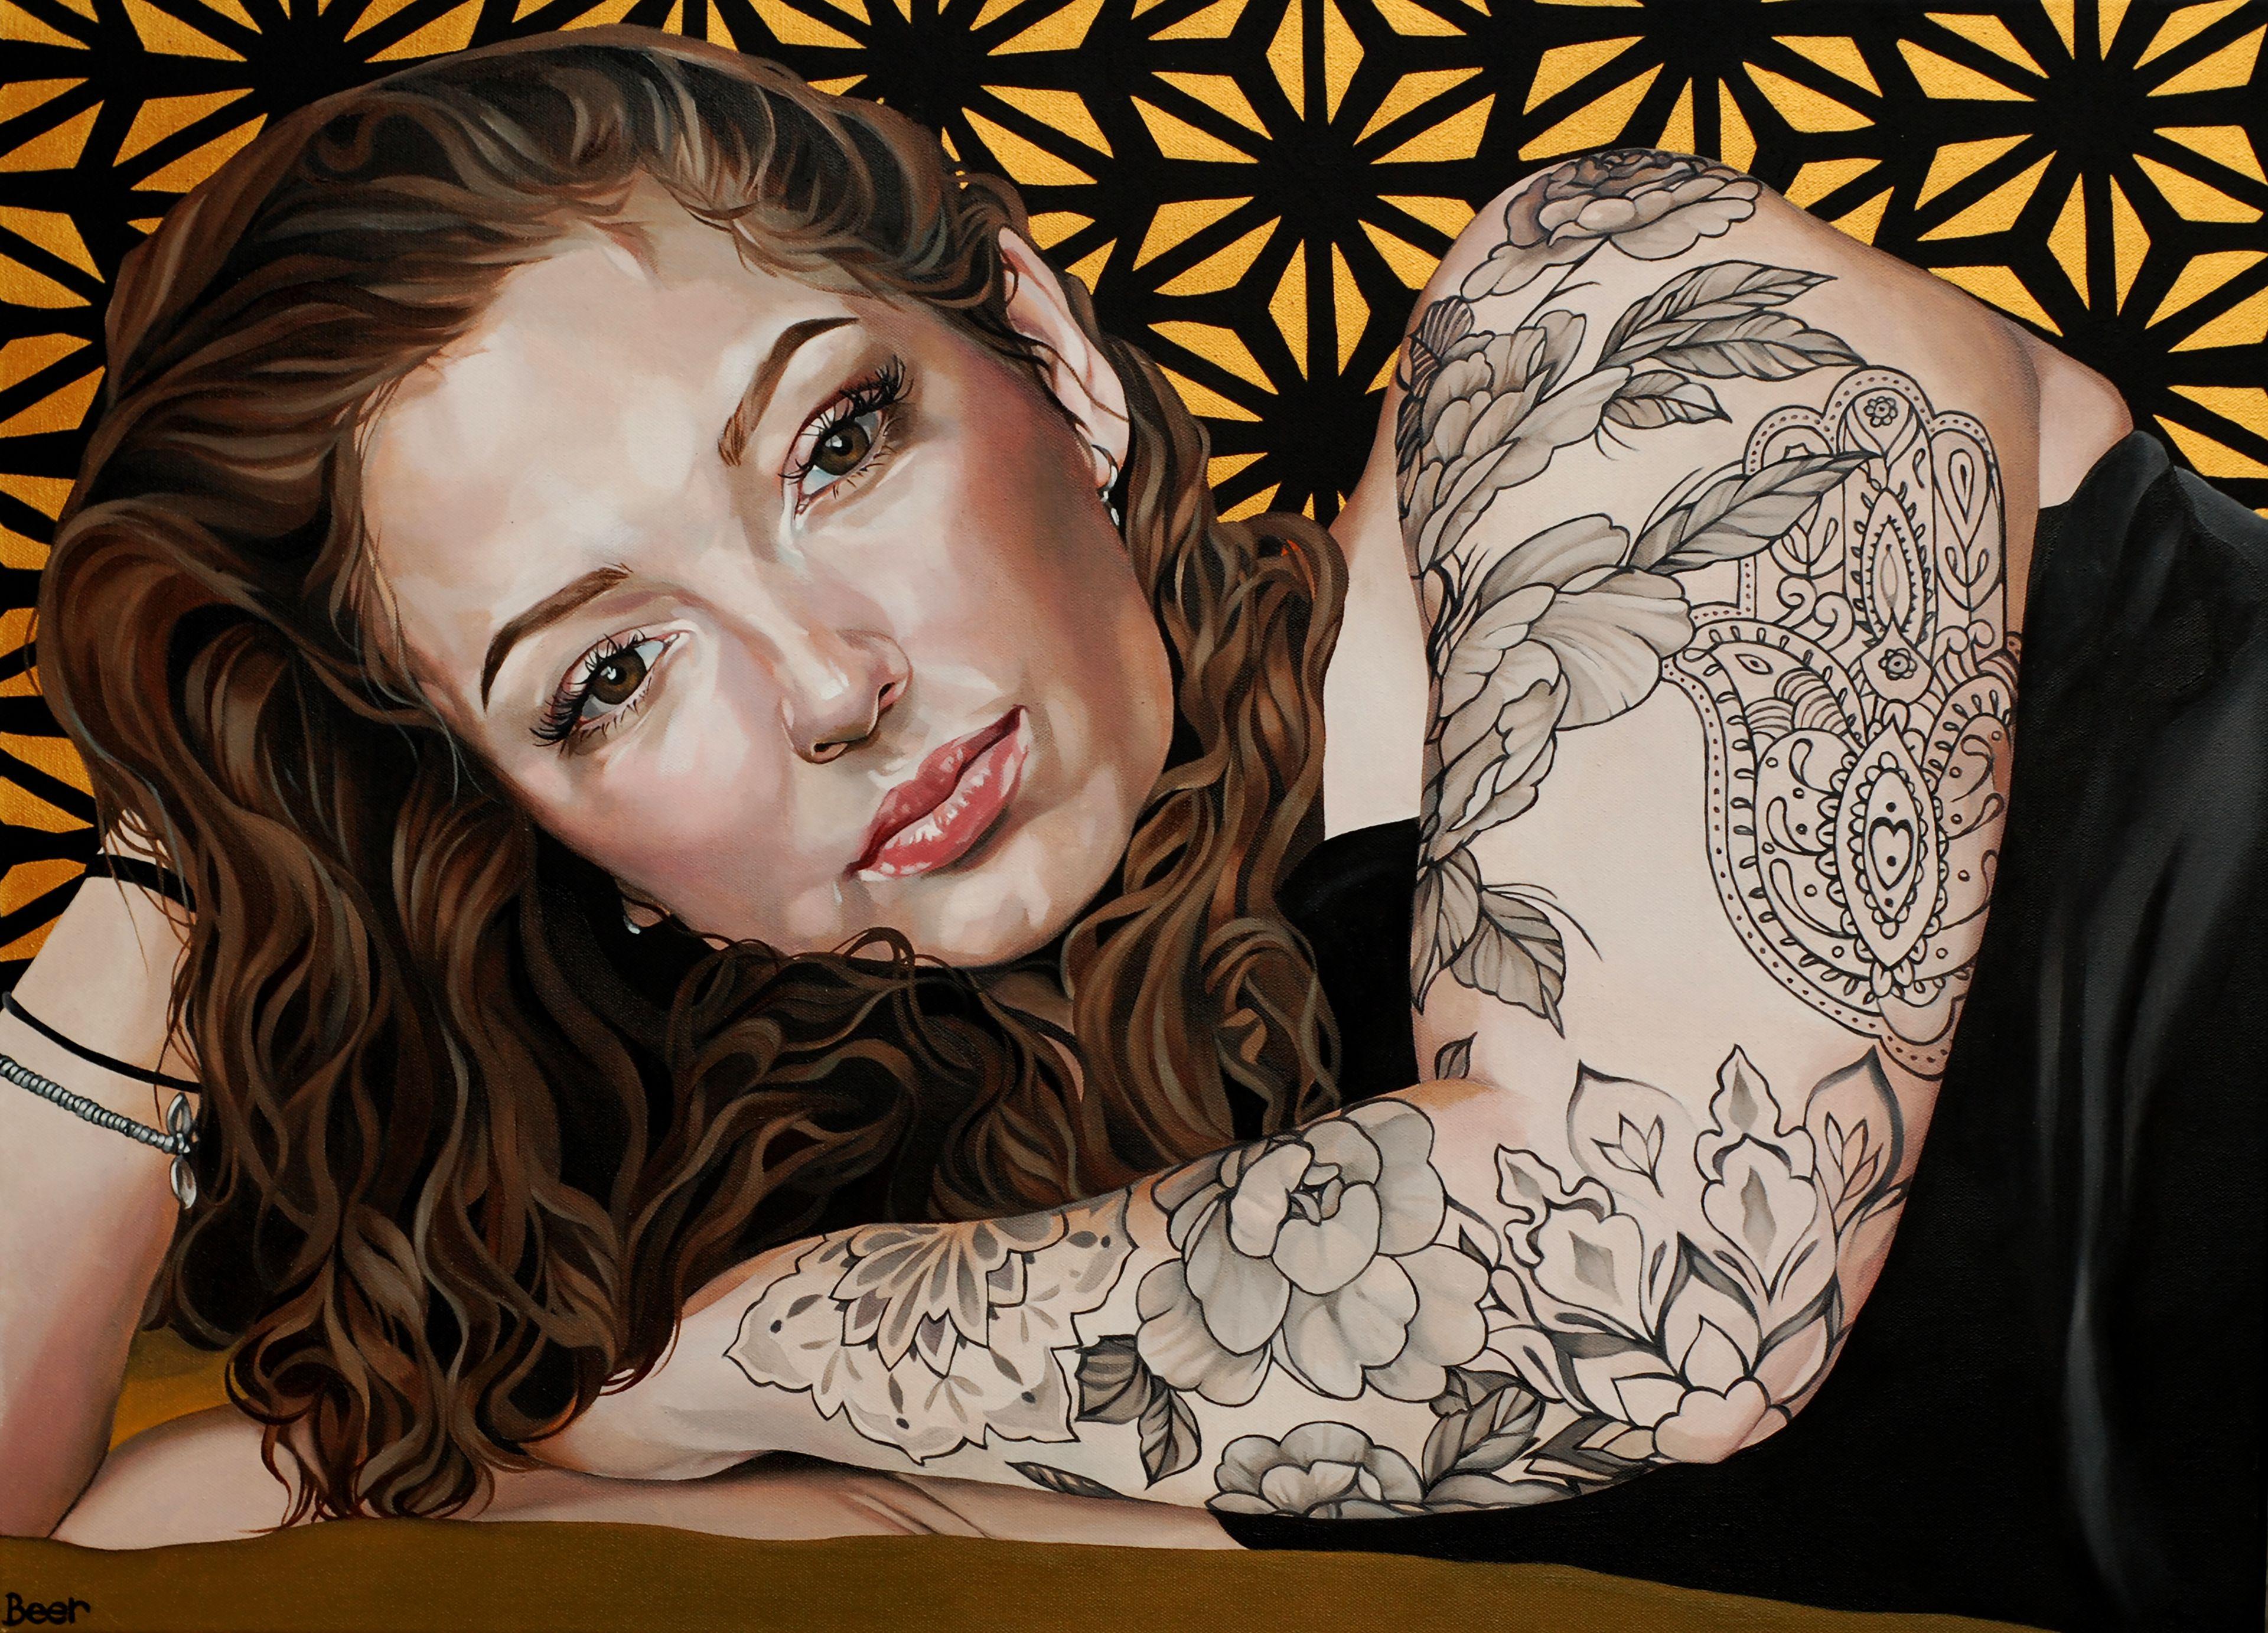 I have painted beautiful Phoebe many times, the process gets longer as she adds to her collection of tattoos.  I wanted to create a piece that looks sumptuous and luxurious.  Although painted in oil, I have added metallic gold acrylic to the